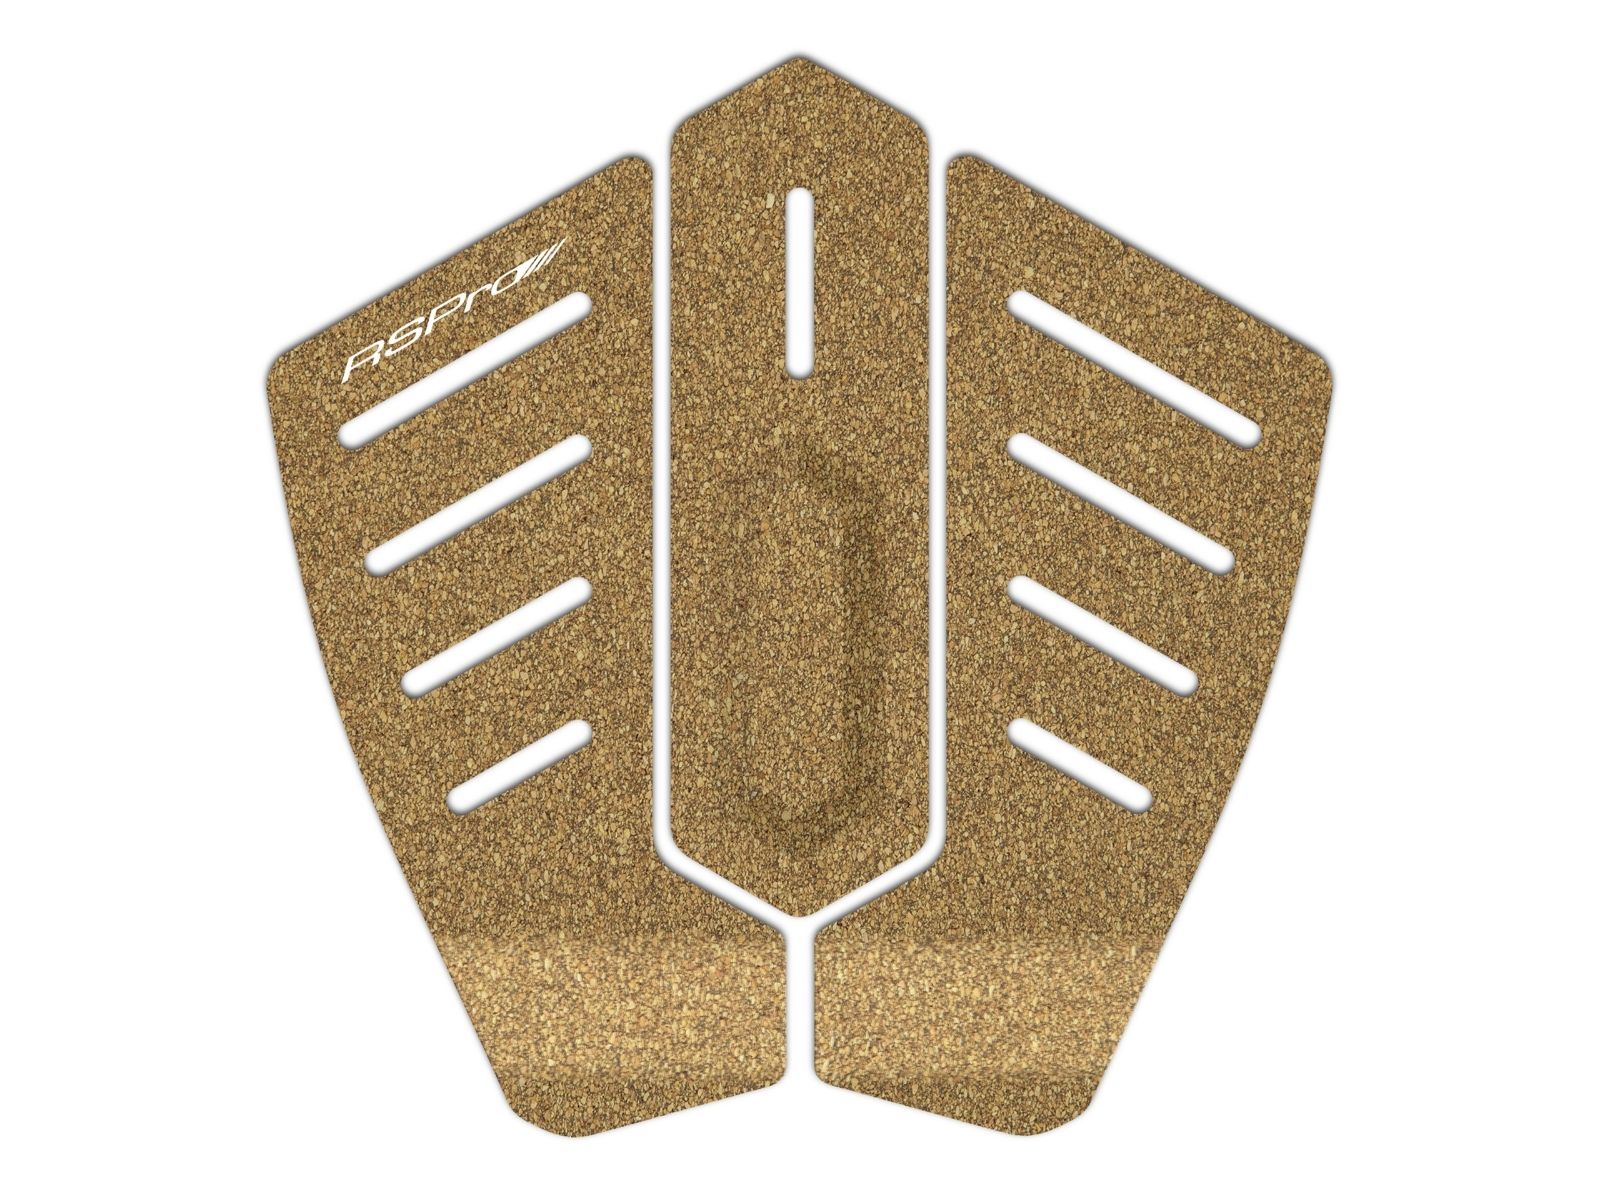 RSPro cork tail pad for surfboards - eco-friendly wax alternative.